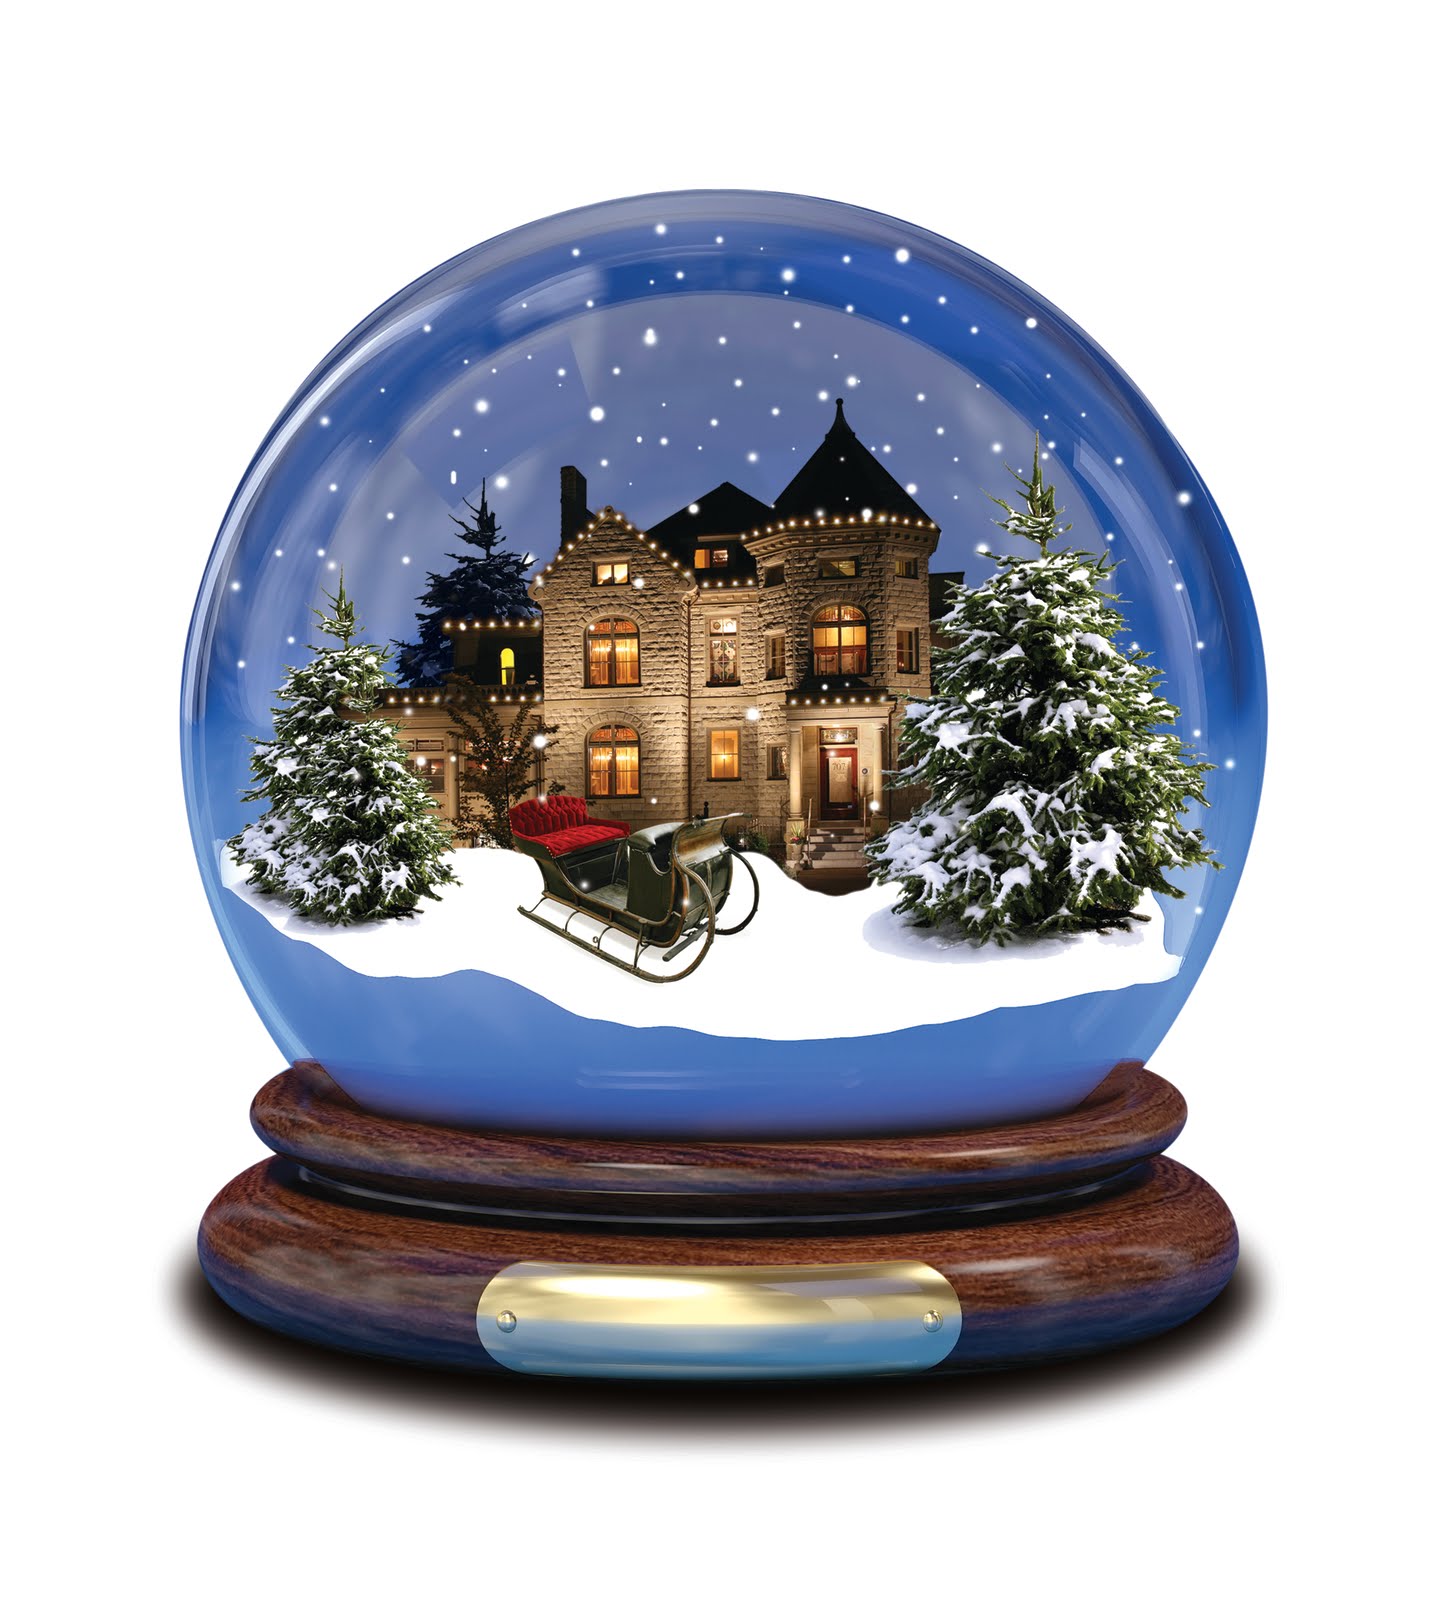 What Would You Do If You Were Stuck Inside a Snow Globe? | Mrs ...